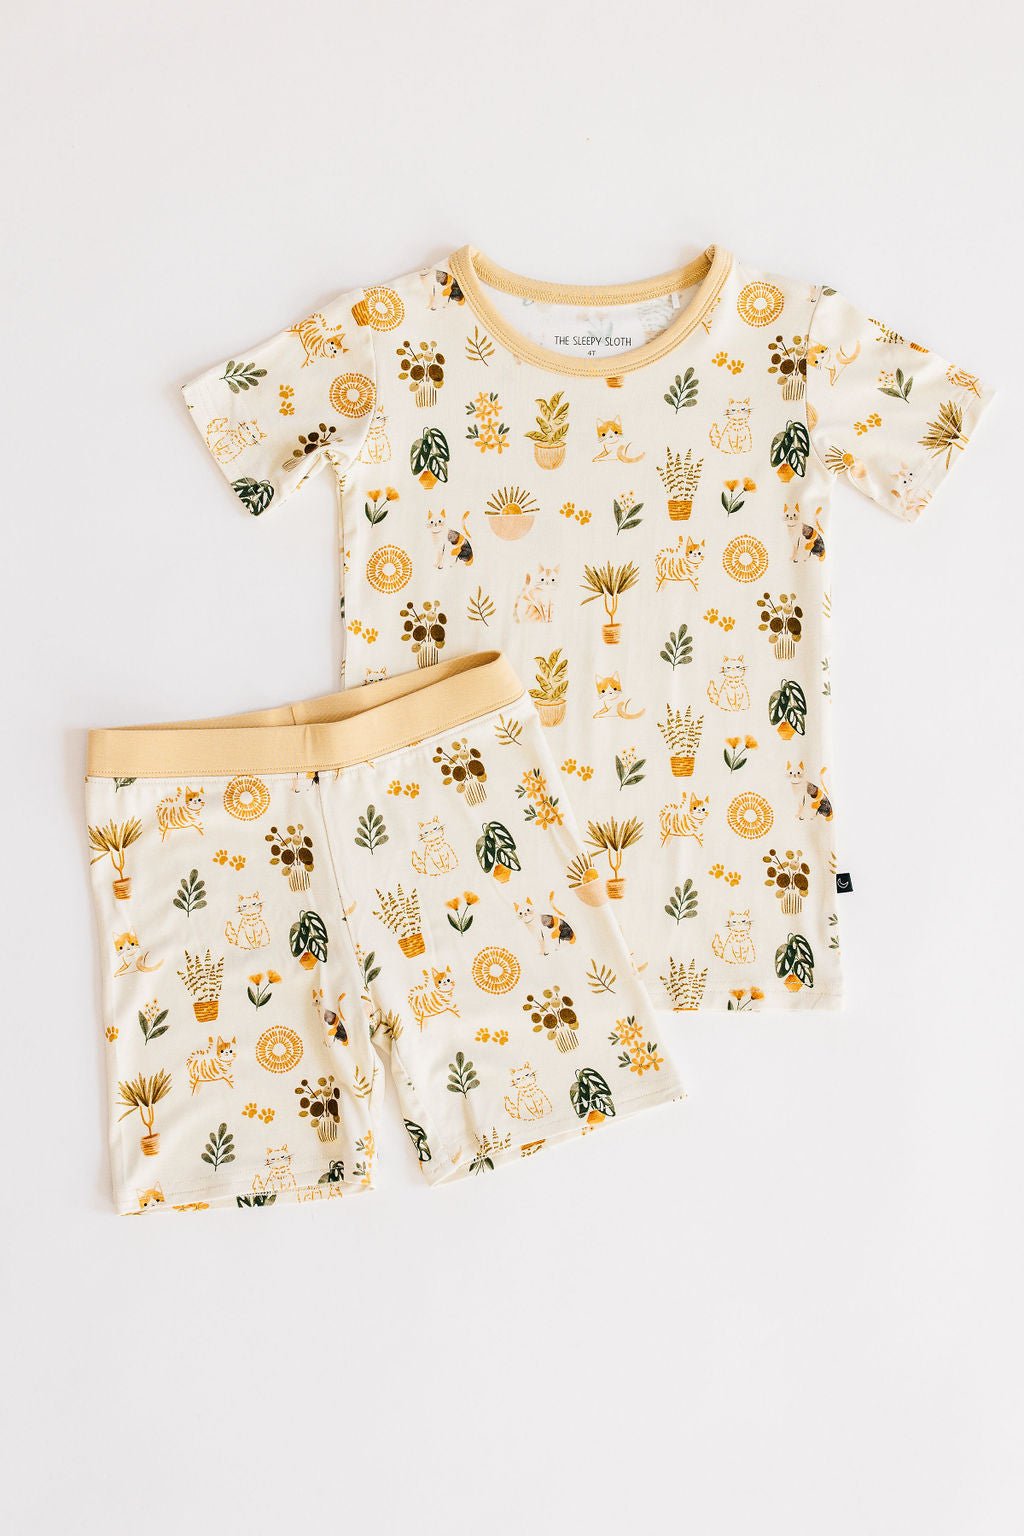 TWO PIECE SHORT JAMMIES - WHISKERS & WALLFLOWERS - The Sleepy Sloth